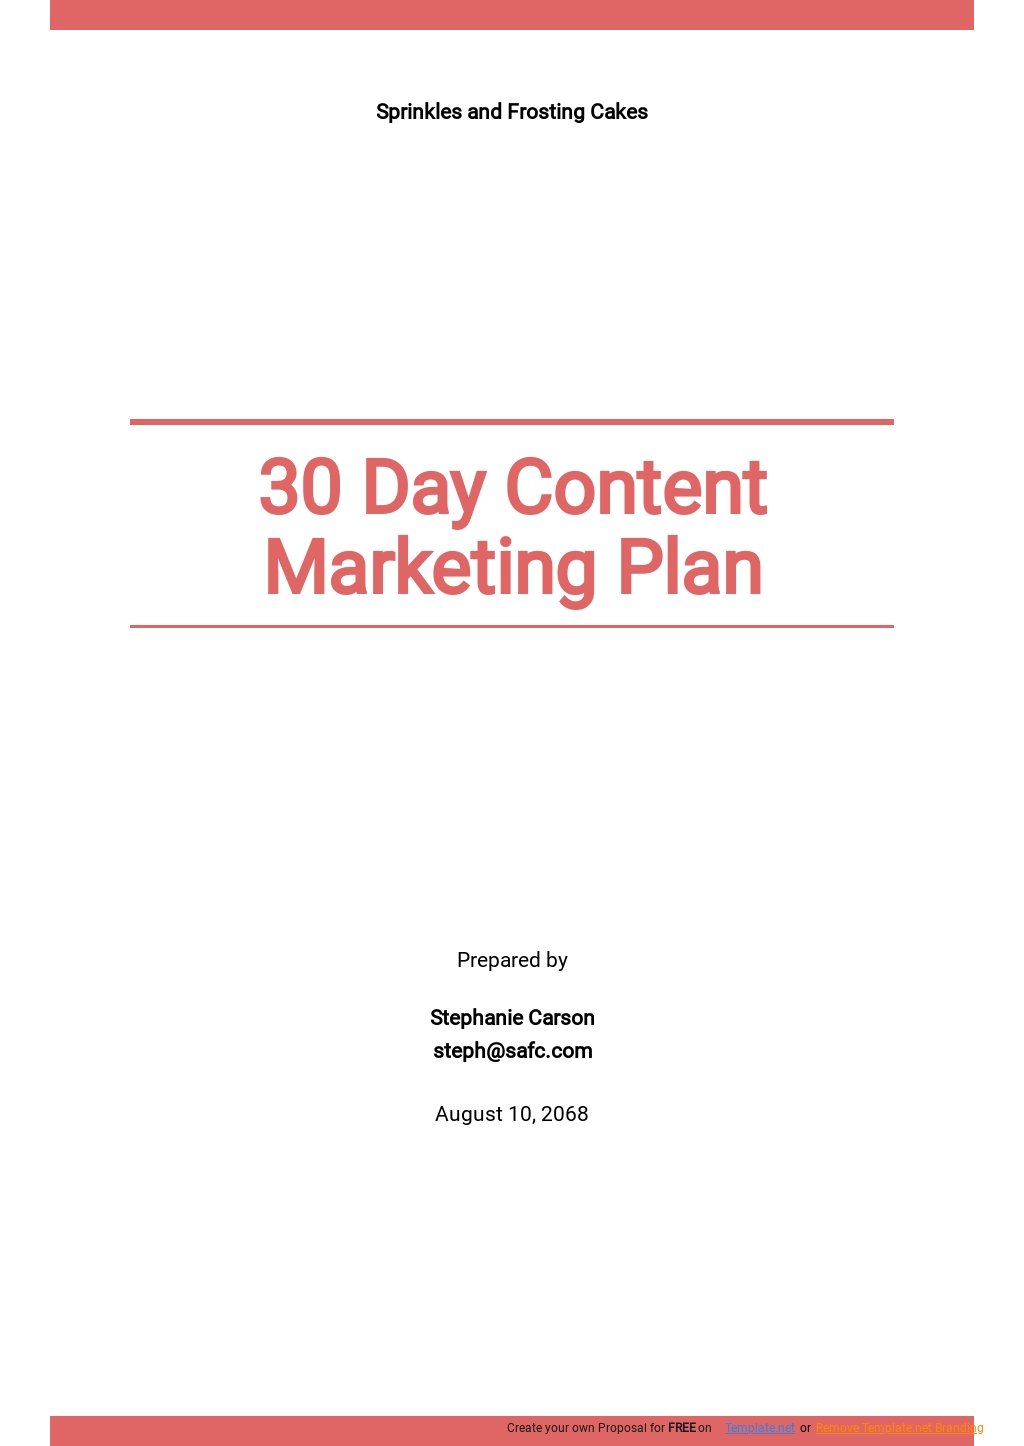 30 Day Content Marketing Plan Template